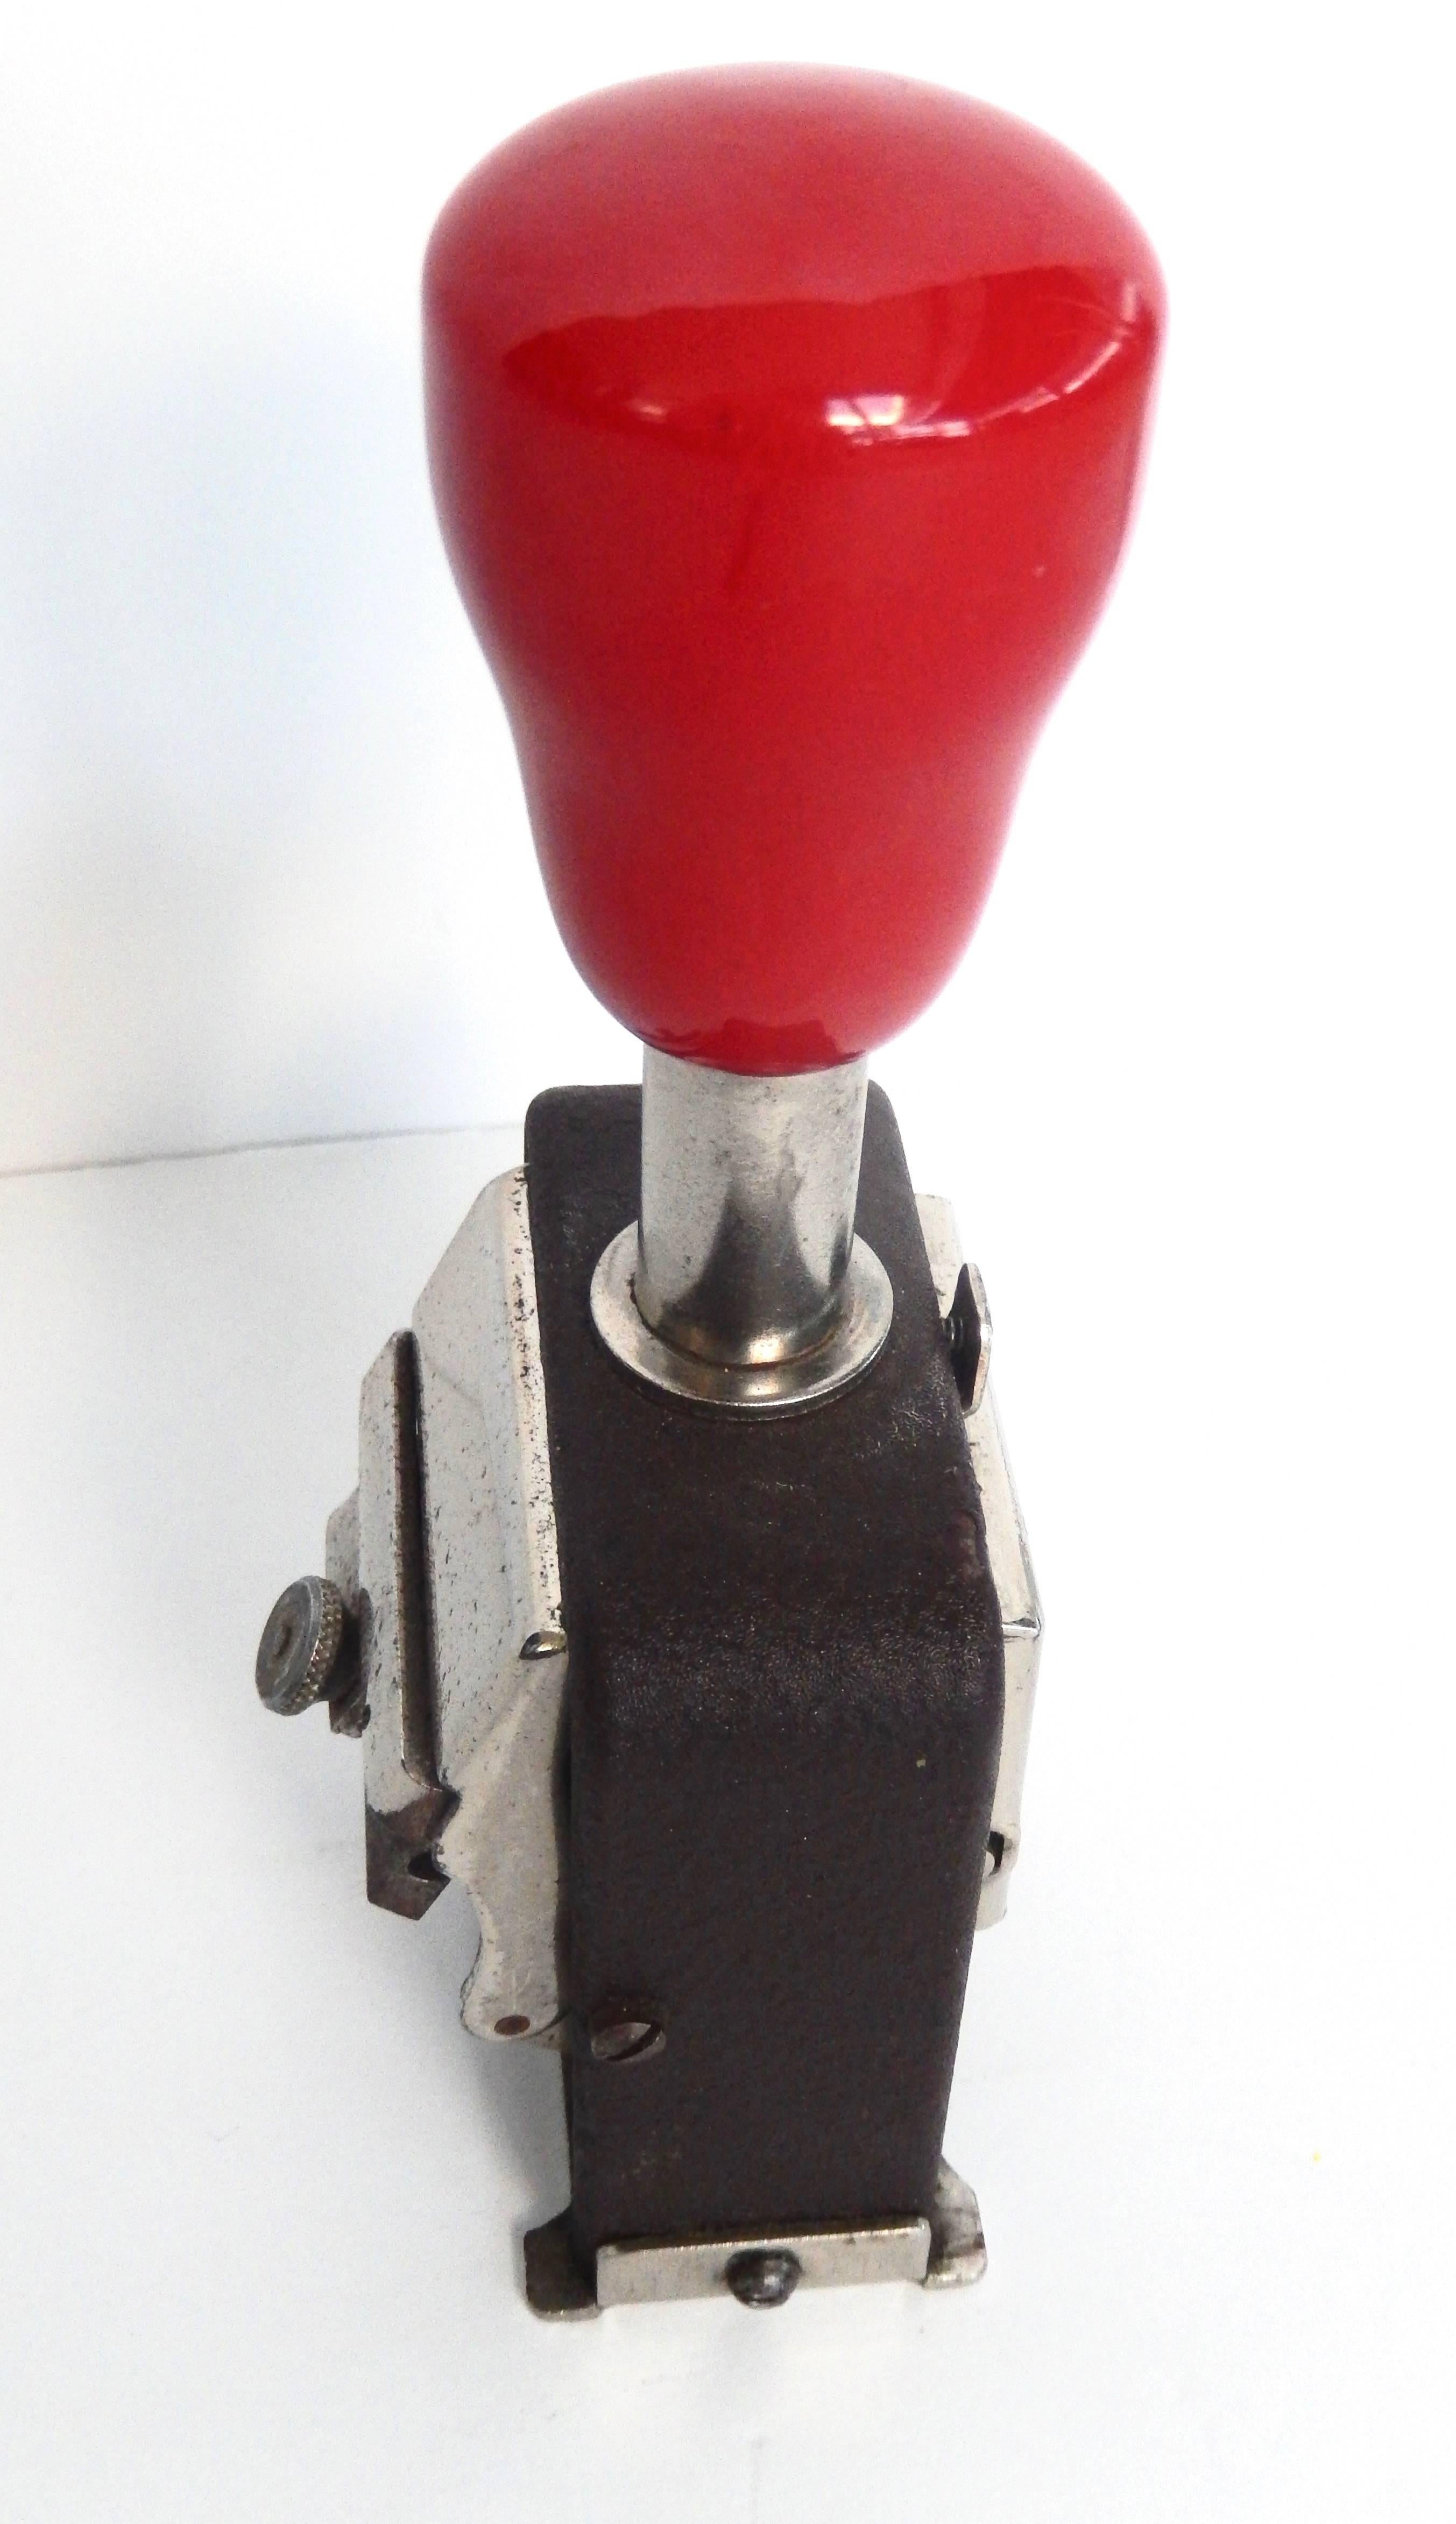 Mid-20th Century American Art Deco/Red Handled Industrial Vintage Numbering Machine For Sale